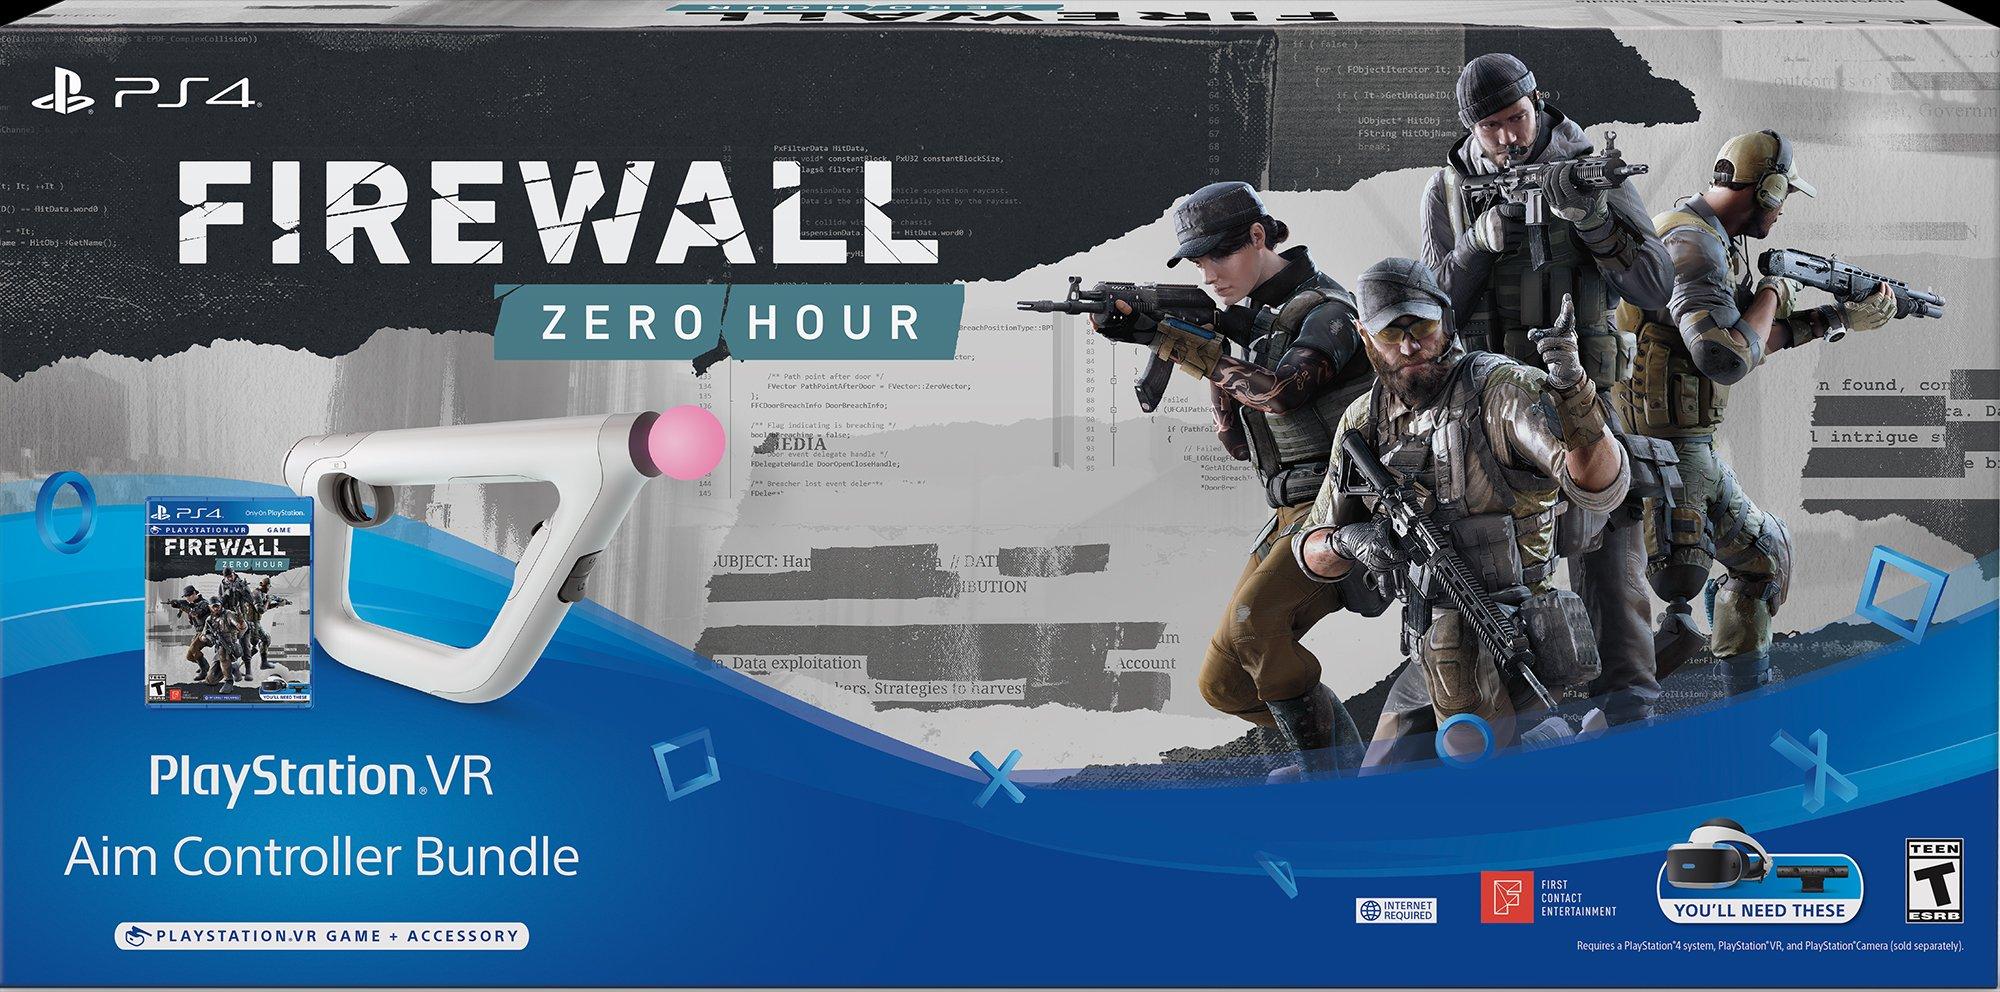 firewall zero hour without aim controller